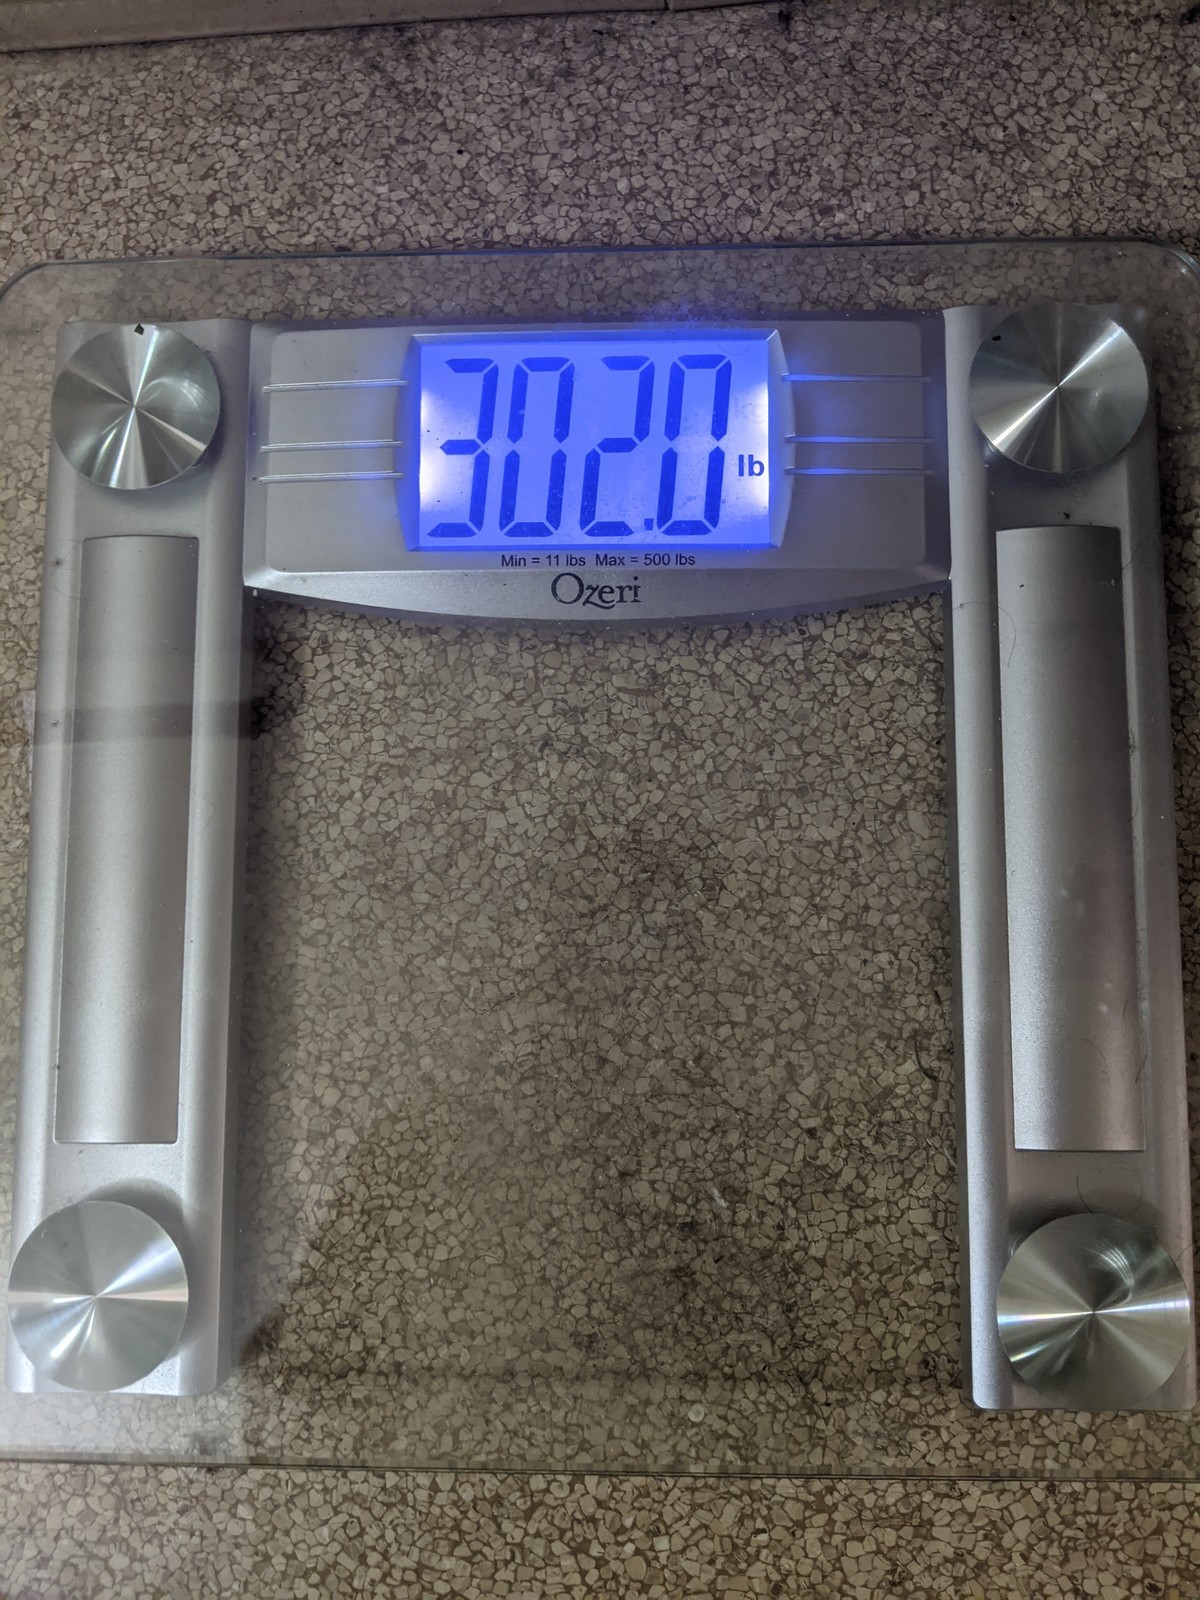 Oct 2020 weight log. join list: WeightlossProgress (165 subs)Mention History So it seems I will probably either be at 300 or just below 300 for my next weight l